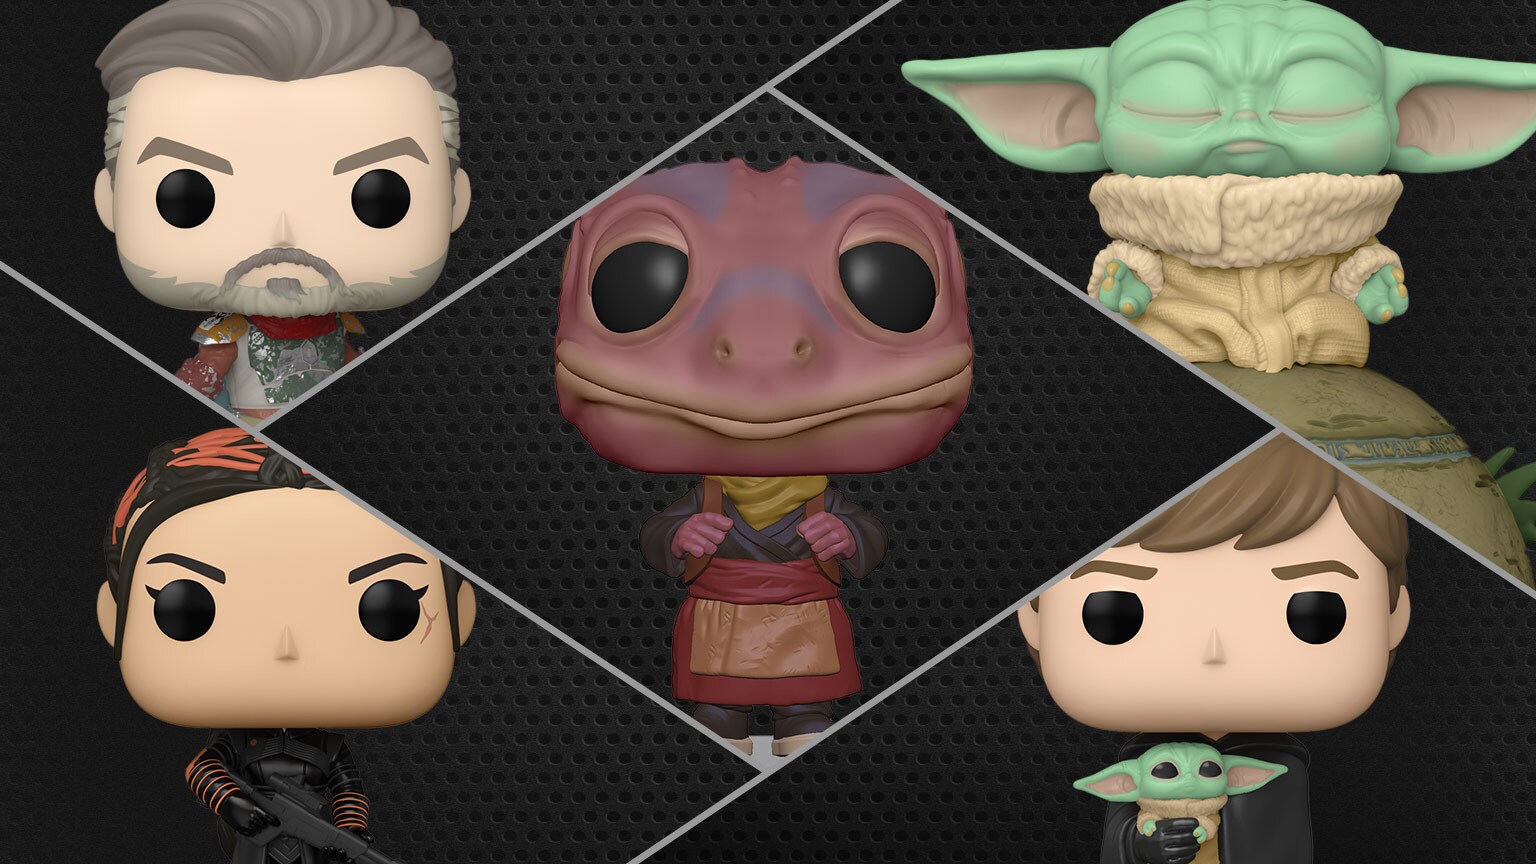 Boba Fett, Fennec Shand, and Frog Lady from The Mandalorian Get the Funko Pop! Treatment - Exclusive Reveal